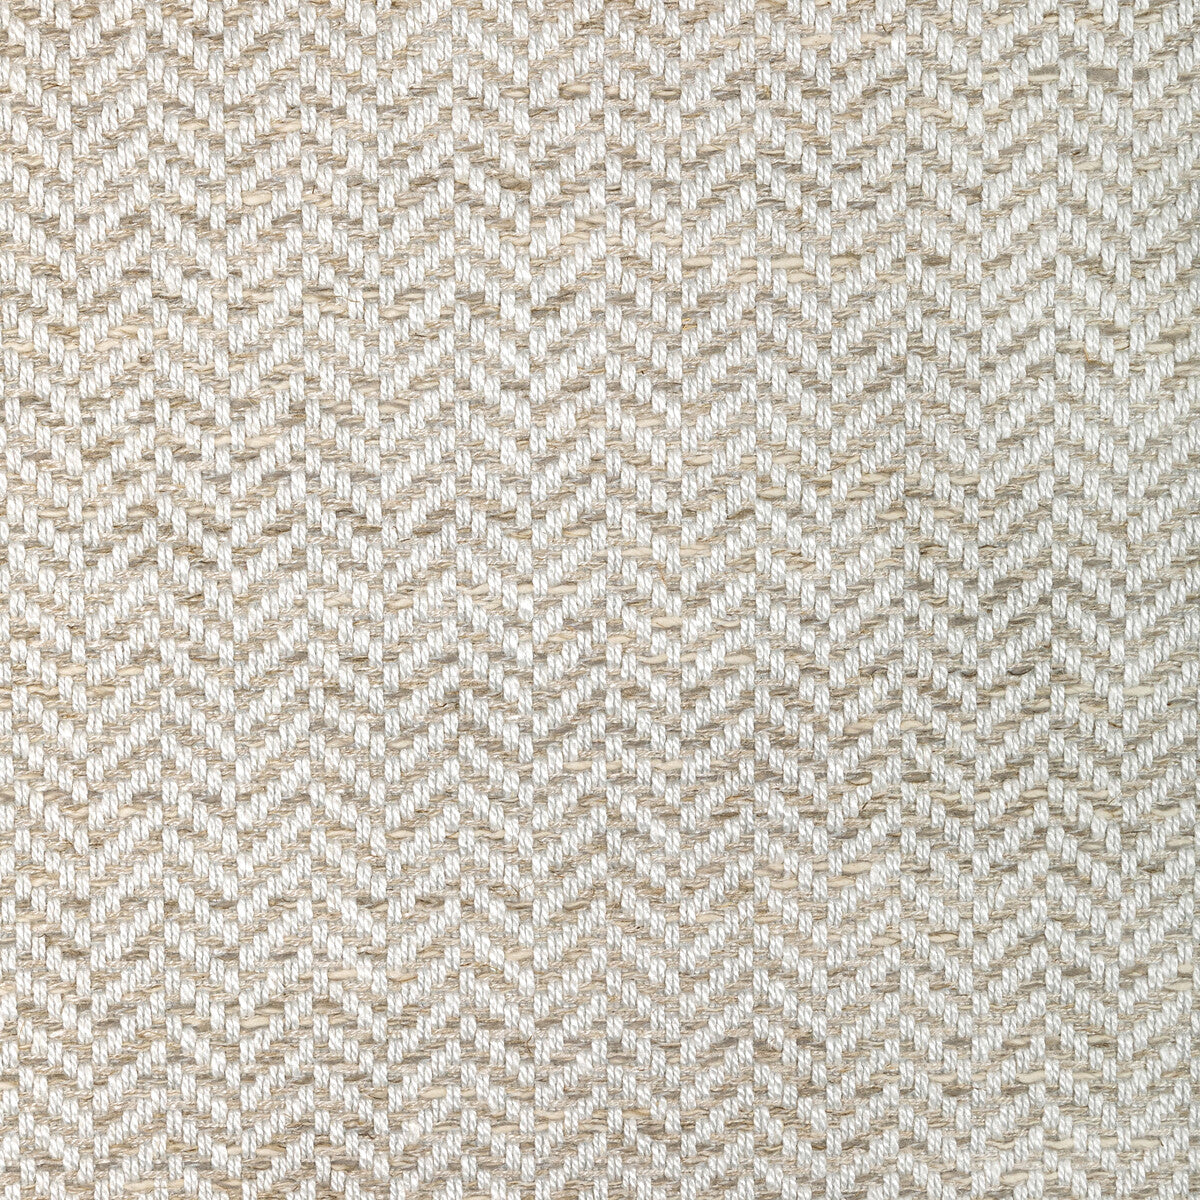 Verve Weave fabric in sandstone color - pattern 36358.16.0 - by Kravet Couture in the Corey Damen Jenkins Trad Nouveau collection